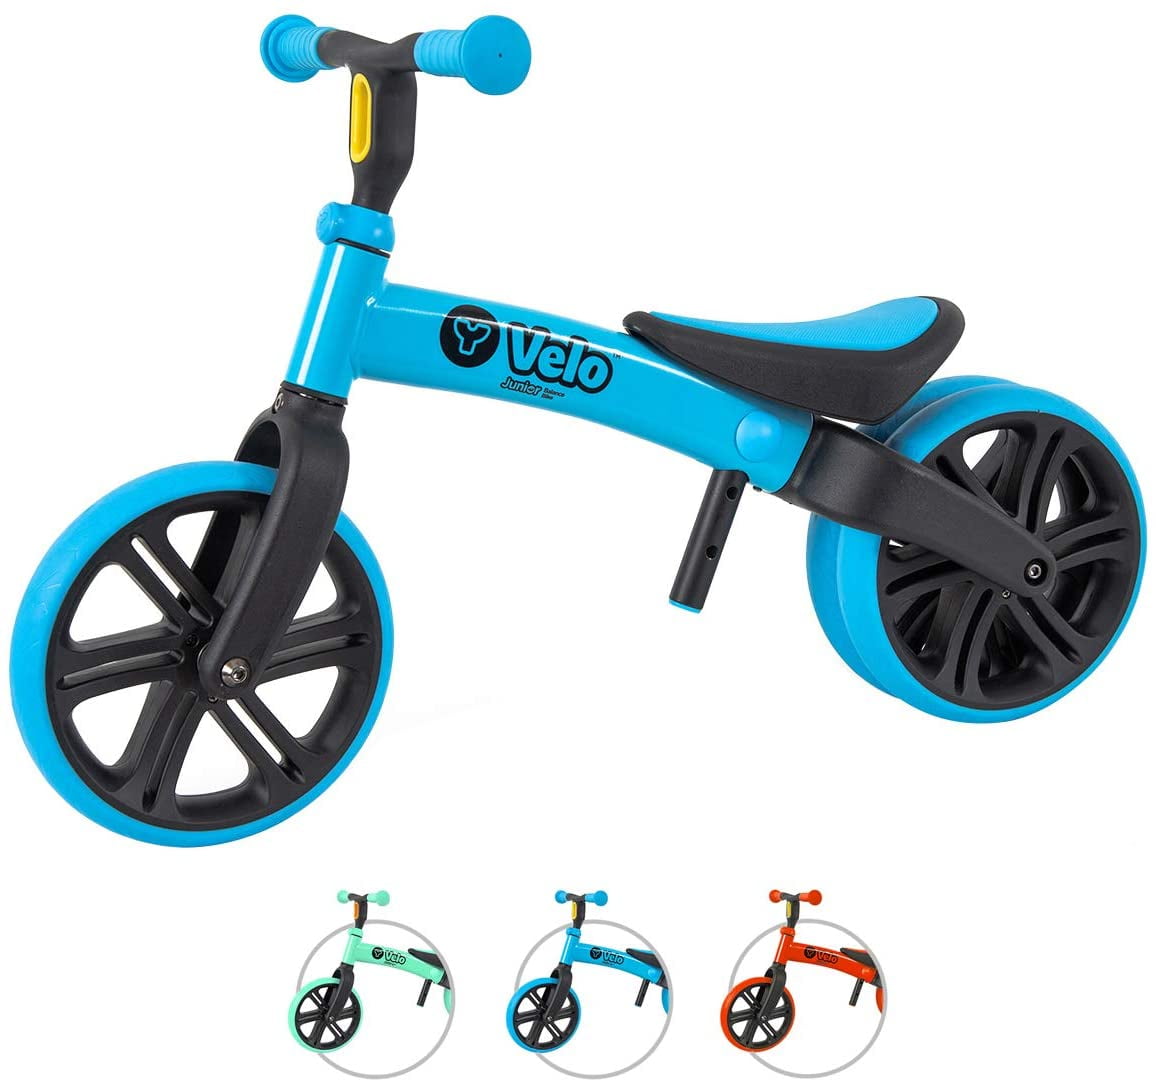 Swagtron K3 Balance Bike for Kids Ages 2-5 12In No-Pedal Air-Filled Rubber Tires 